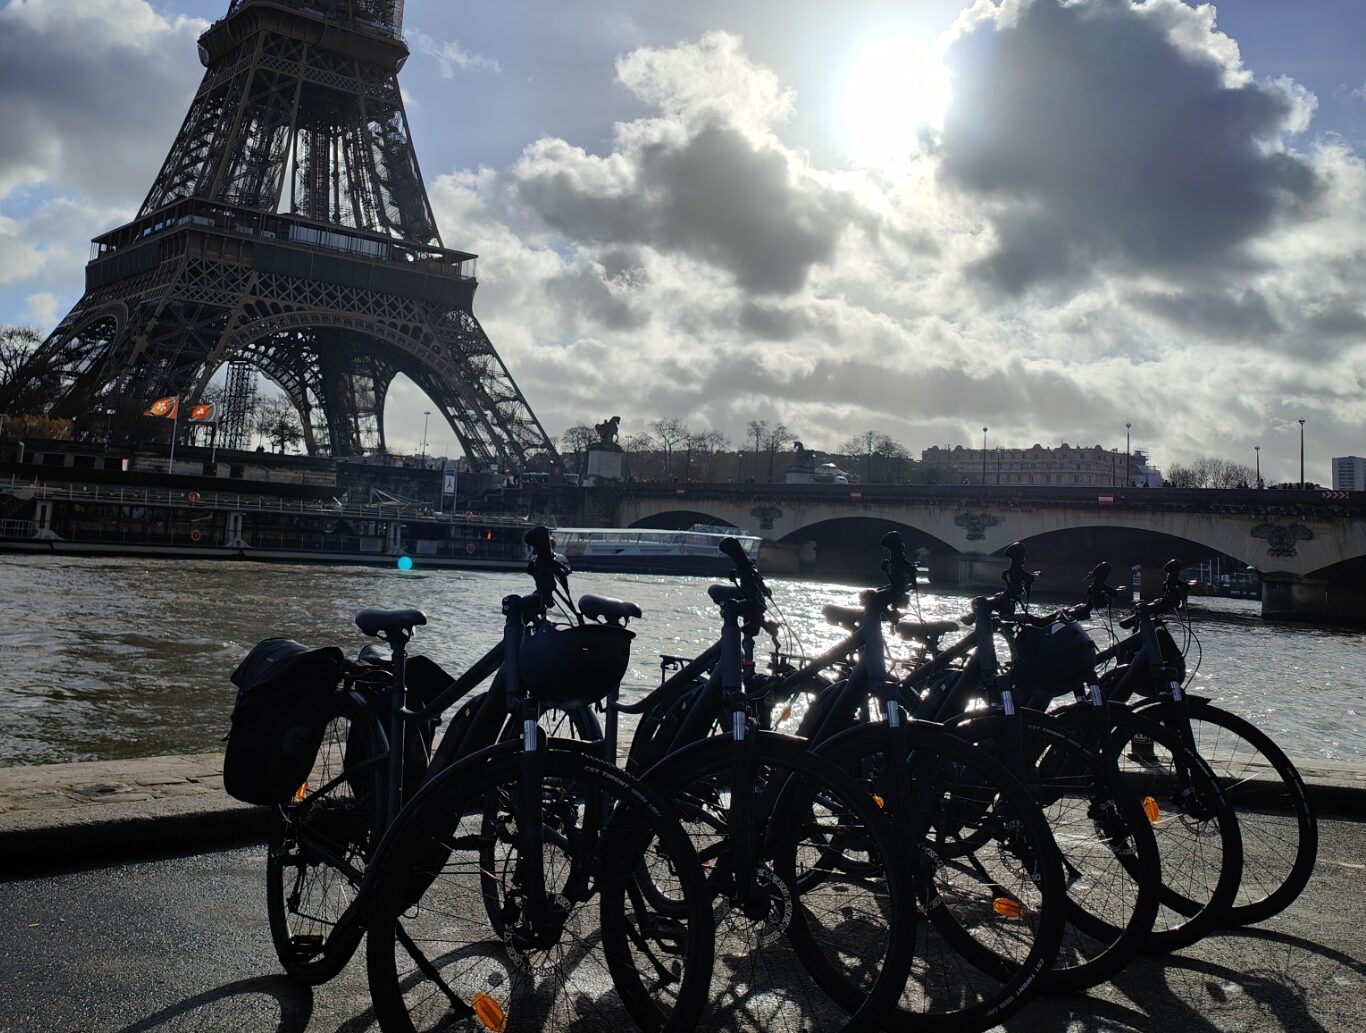 6 e-bikes in front of Eiffel Tower